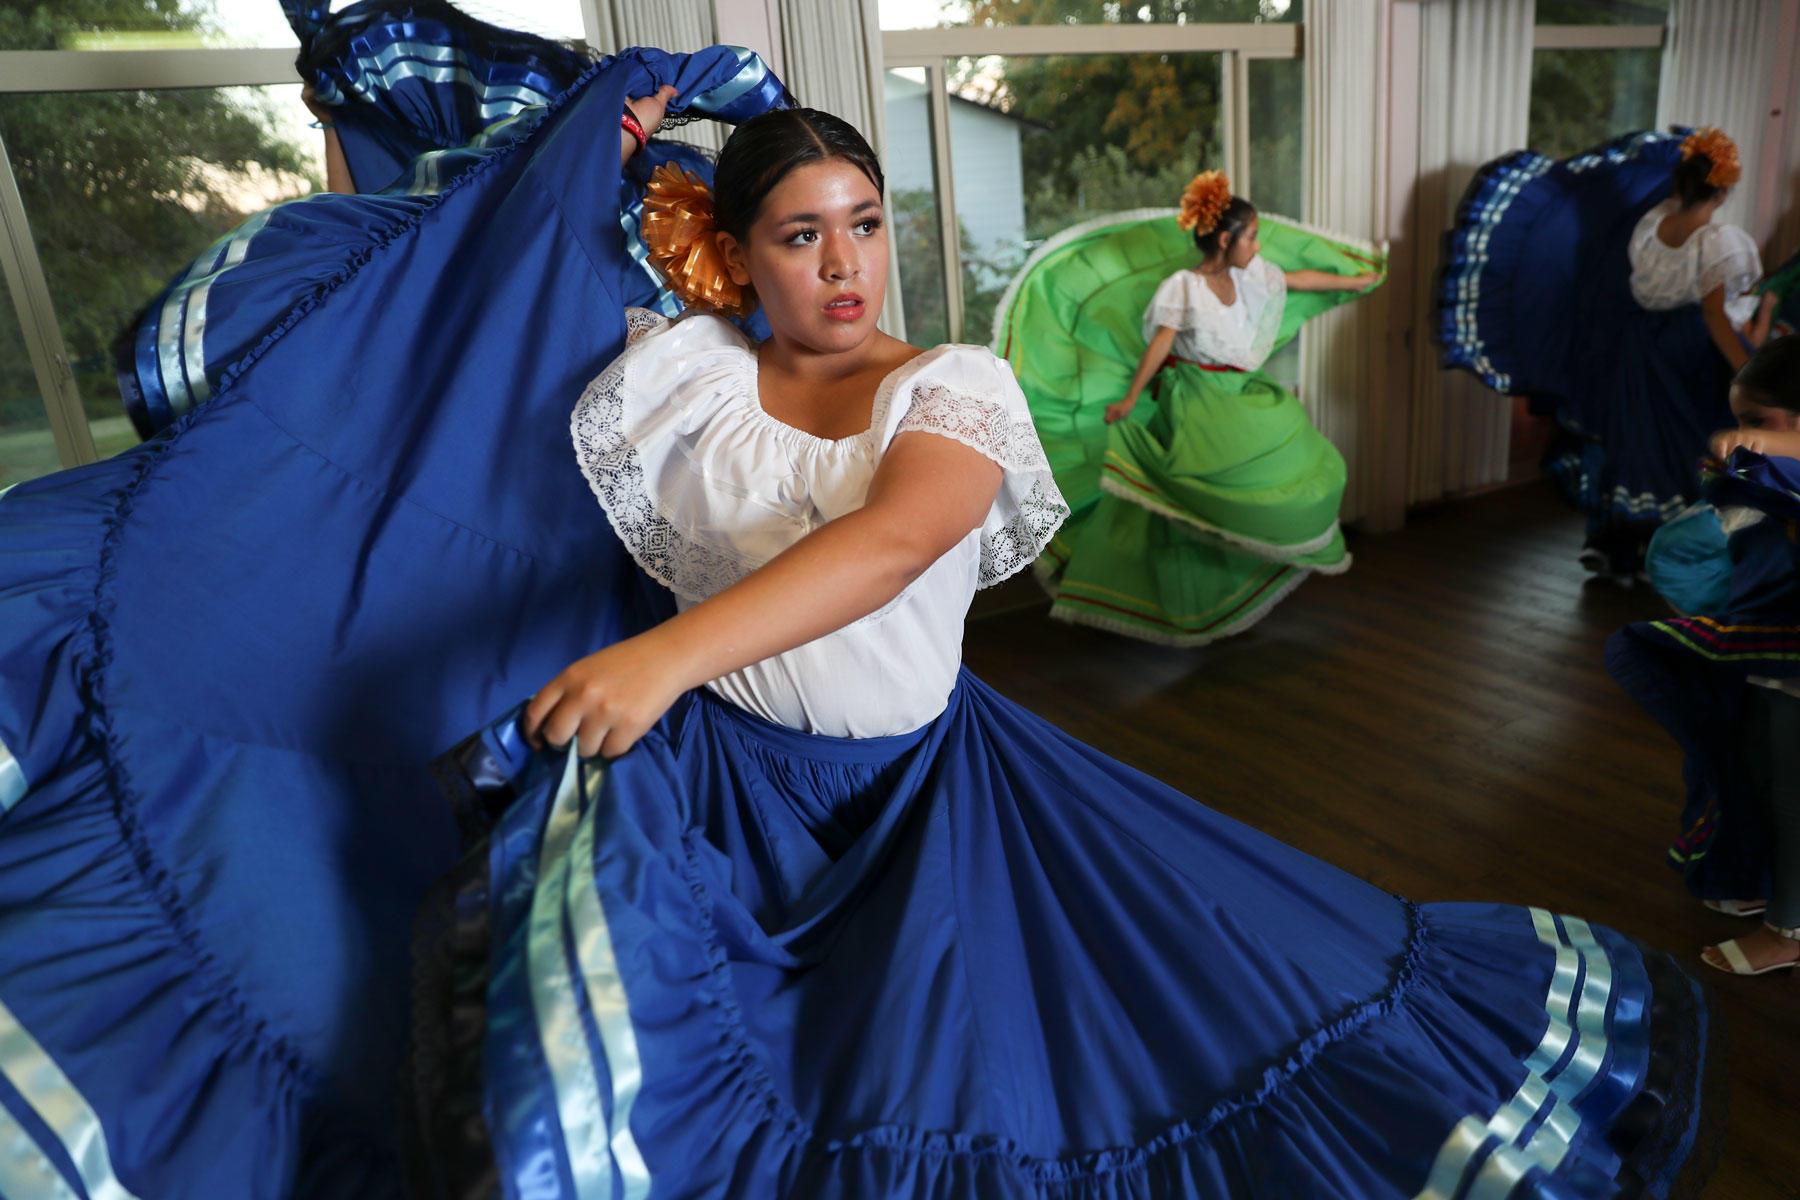 Baile Folklórico emphasizes local folk culture with ballet characteristics and honors Mexico’s rich history of Indigenous, African and Spanish roots.